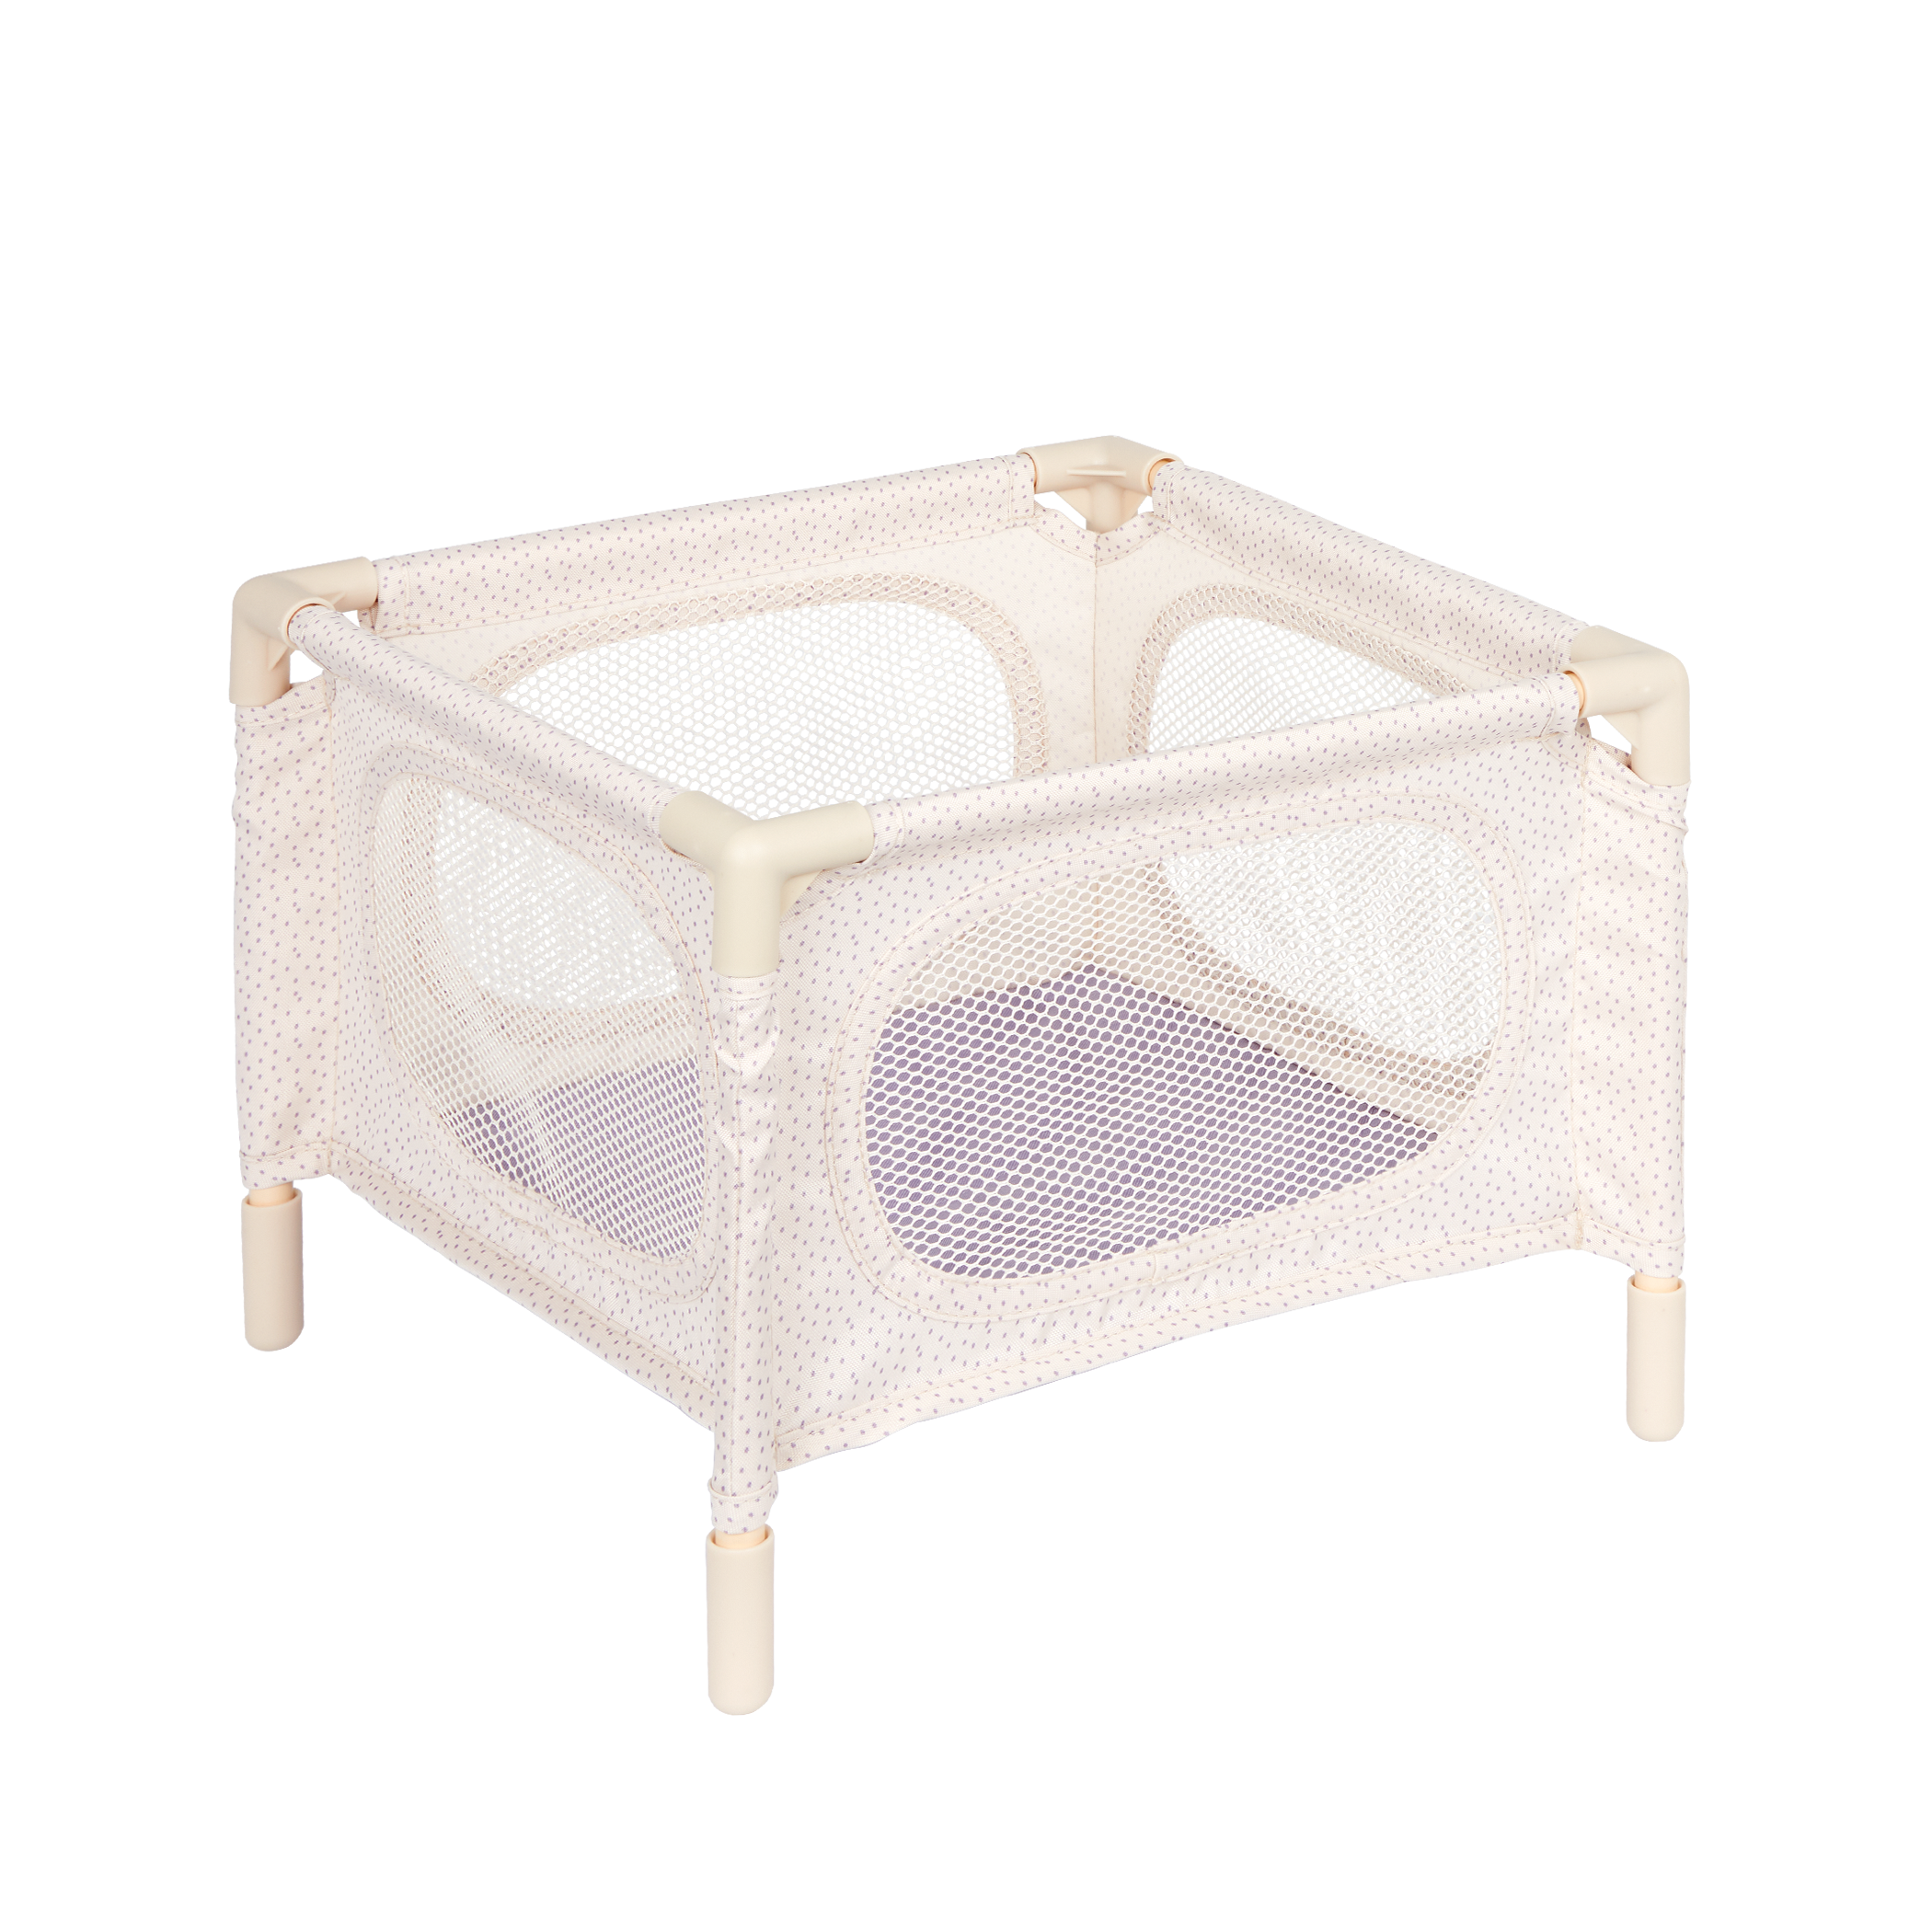 Baby Doll Crib With Canopy Baby Doll Accessories